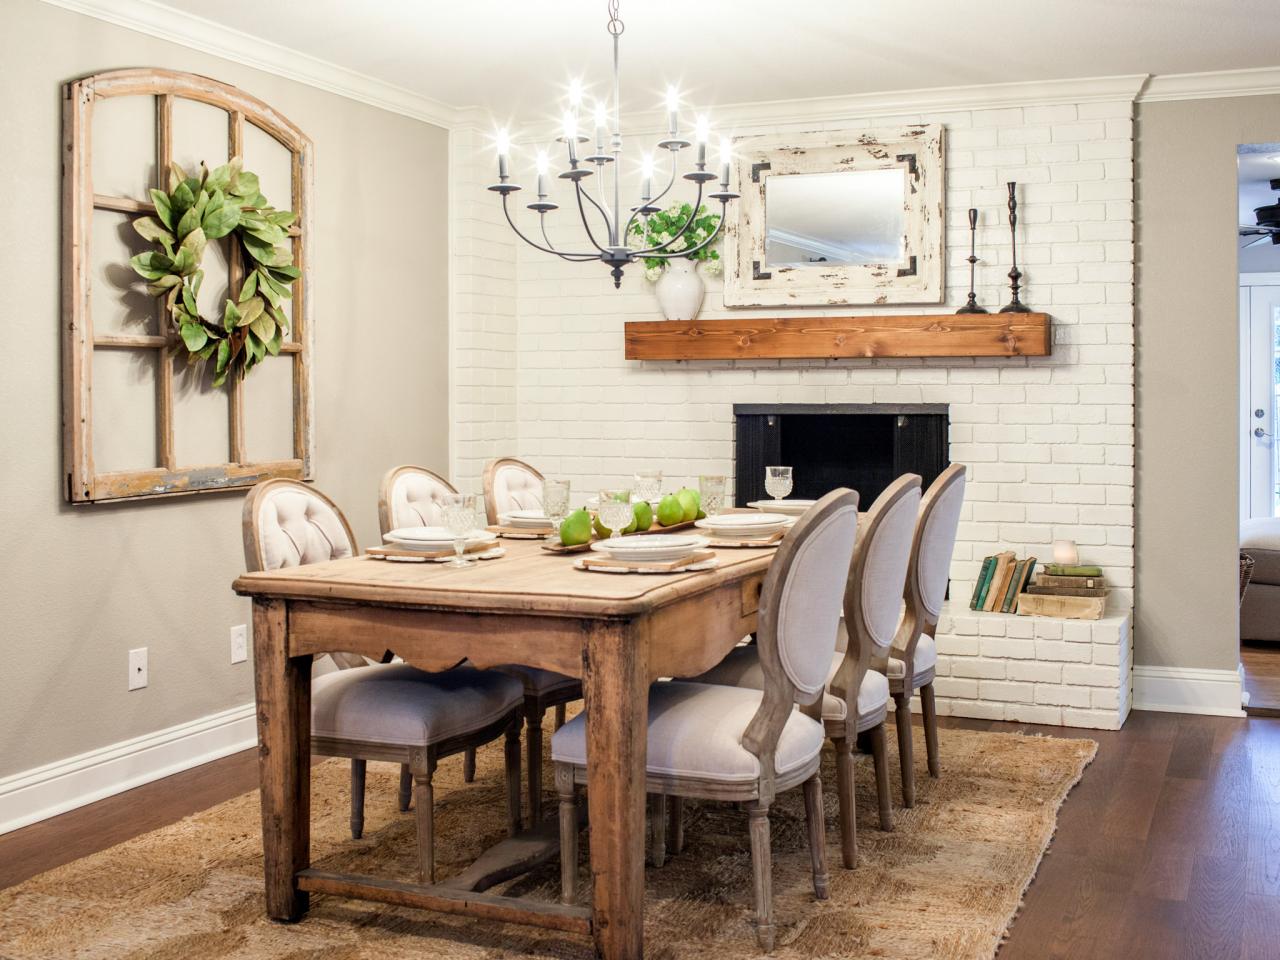 Fixer Upper Fan? Farmhouse obsessed? Read these 10 tips on how to get the Fixer Upper look inspired by Chip and Joanna Gaines!